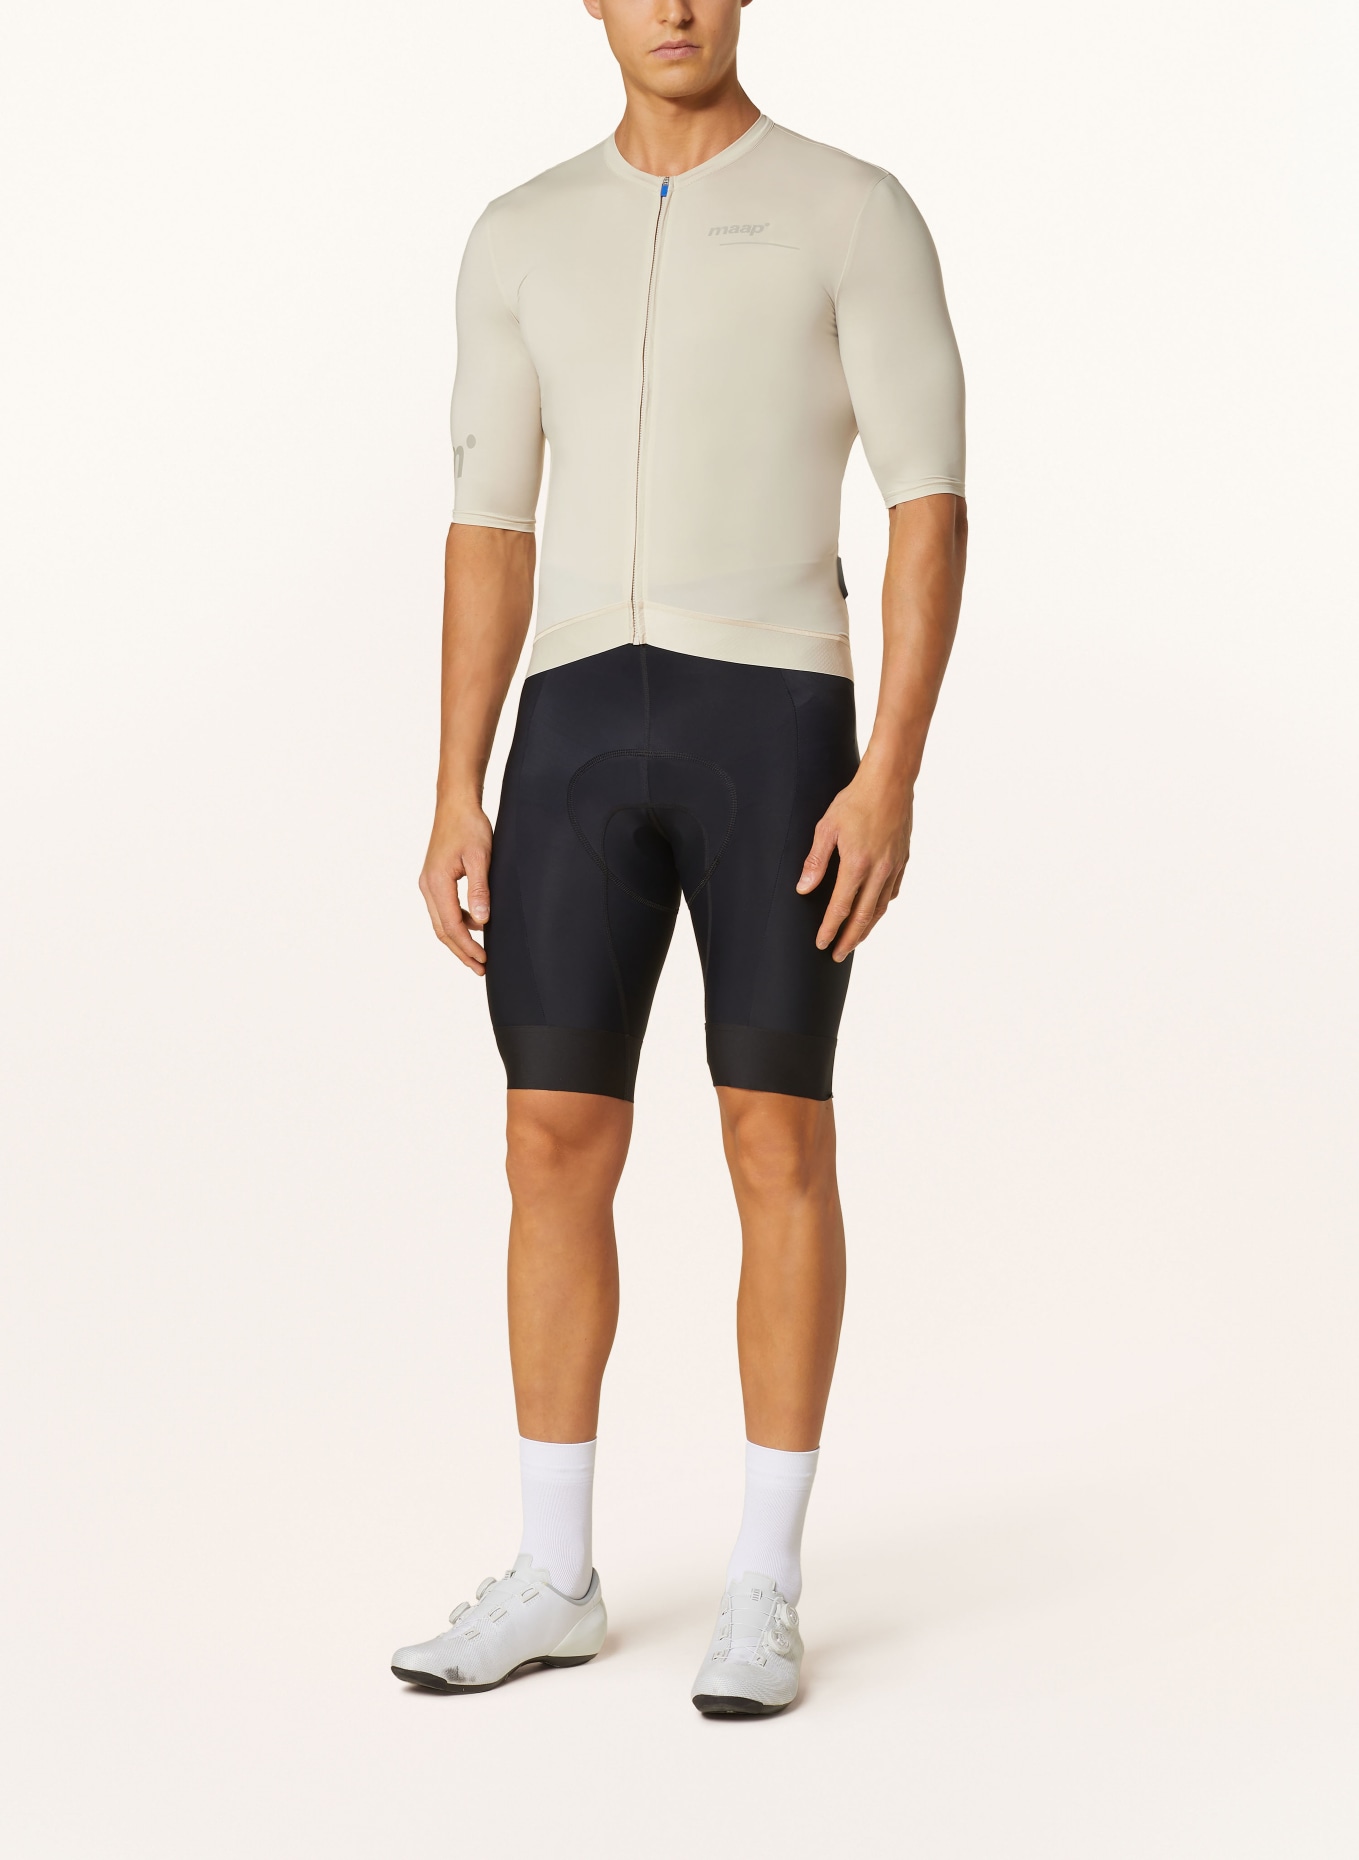 MAAP Cycling jersey TRAINING JERSEY 2.0, Color: CREAM (Image 2)